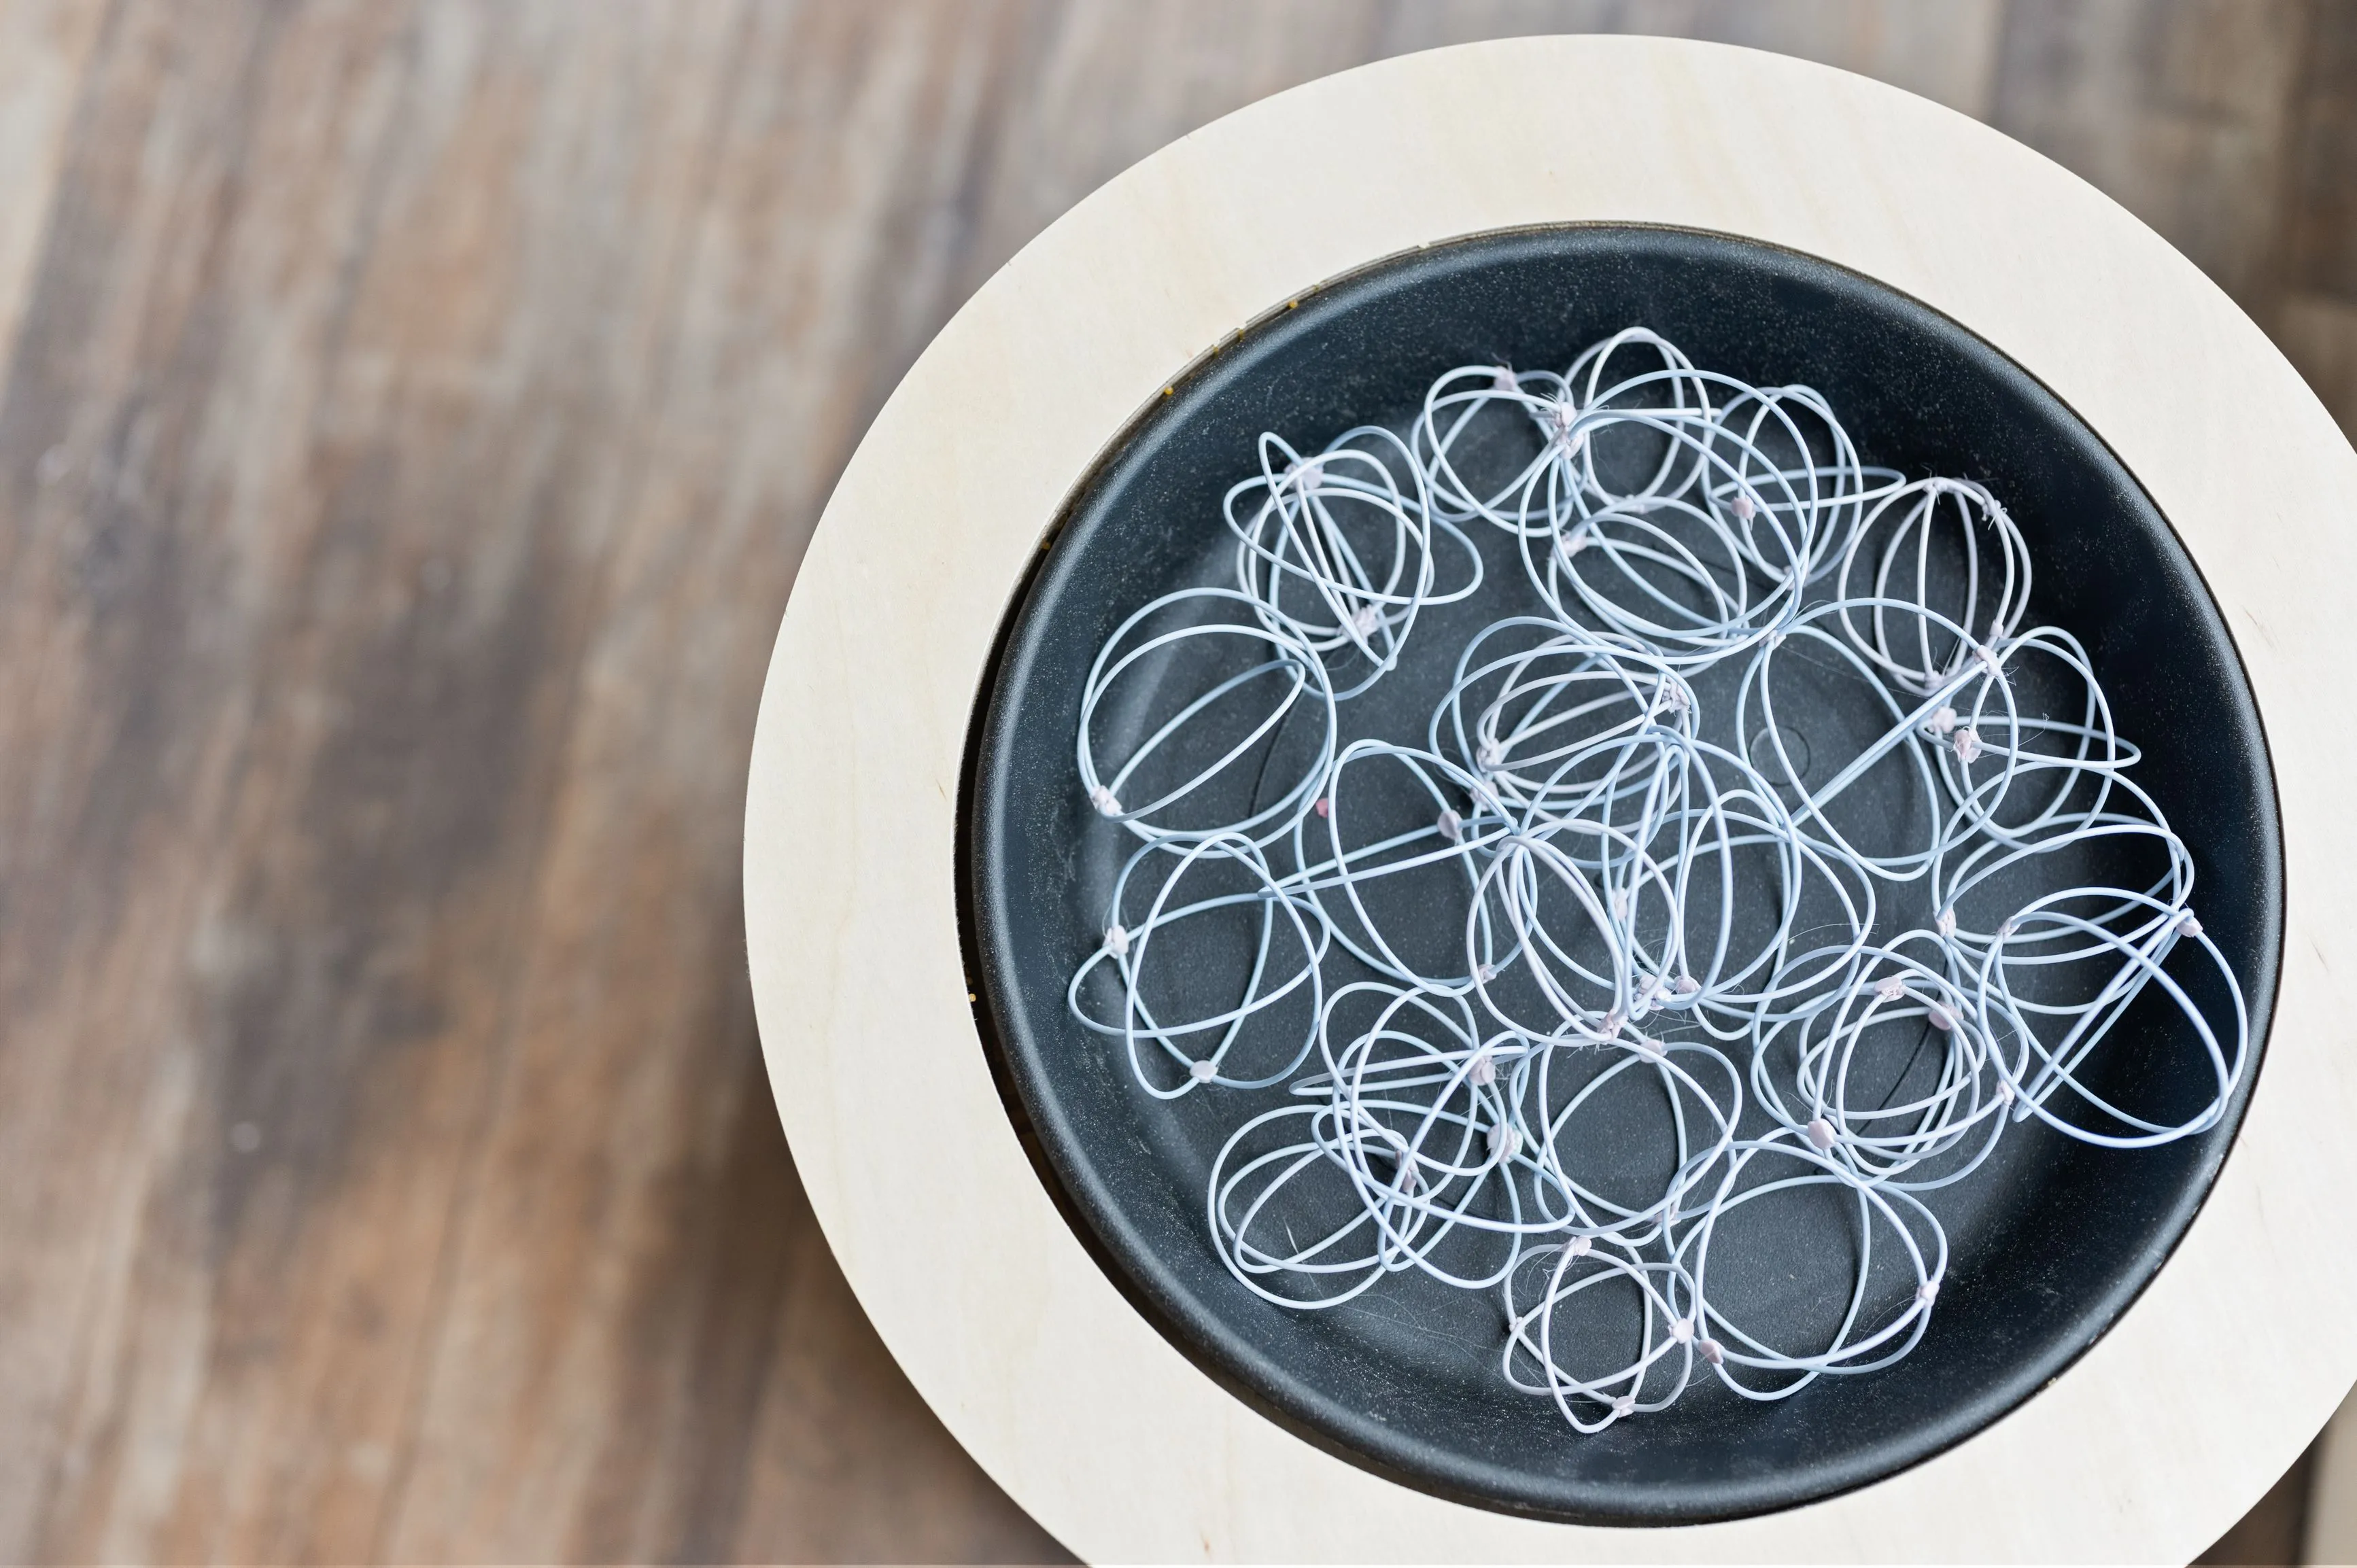 Bowl of assorted rubber bands on a wooden surface.